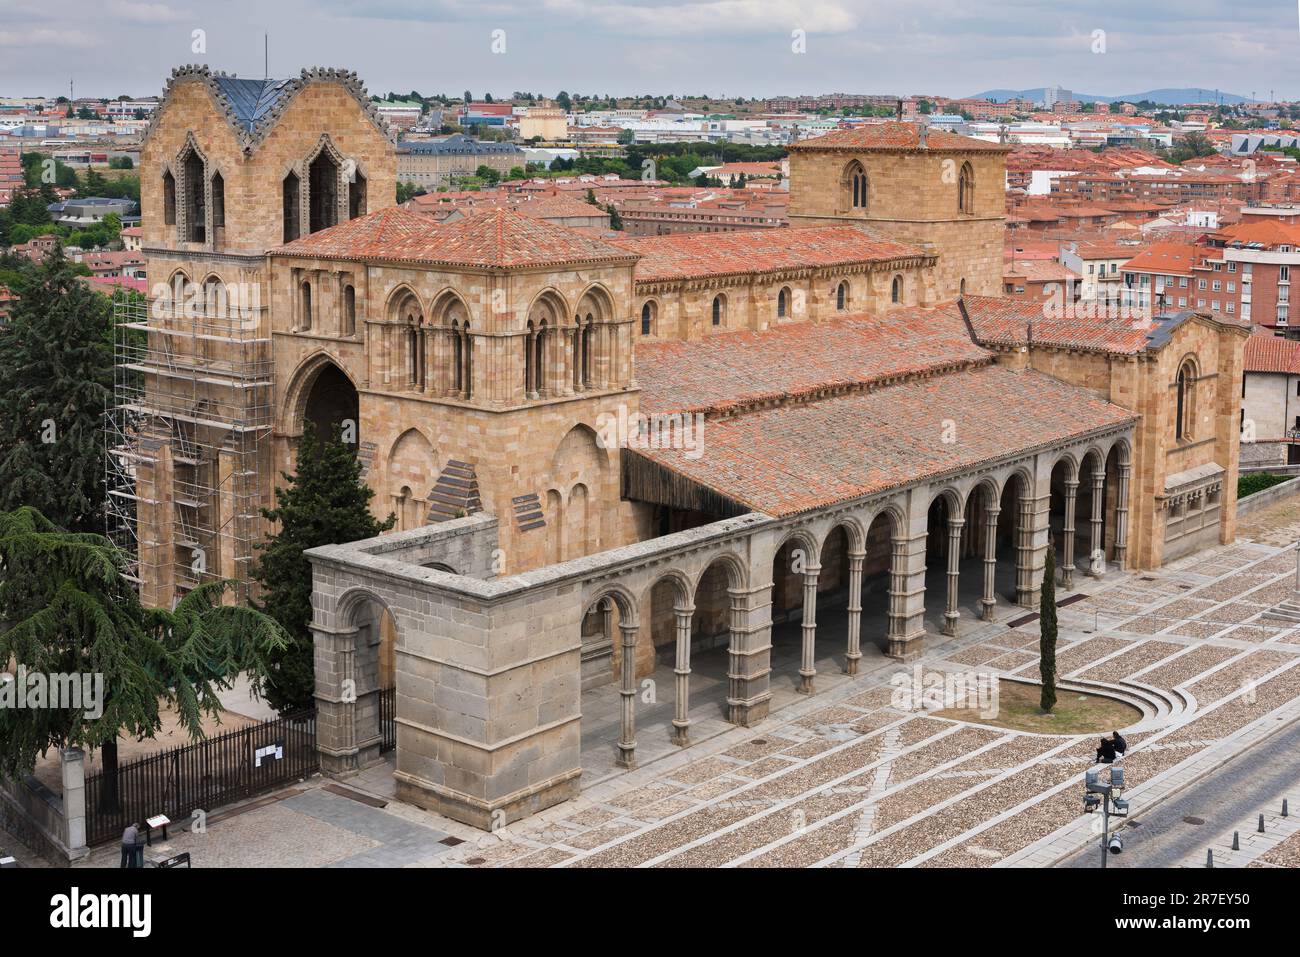 Basilica de San Vicente, view of the Basilica de San Vicente sited just outside the city walls of Avila in central Spain. Stock Photo